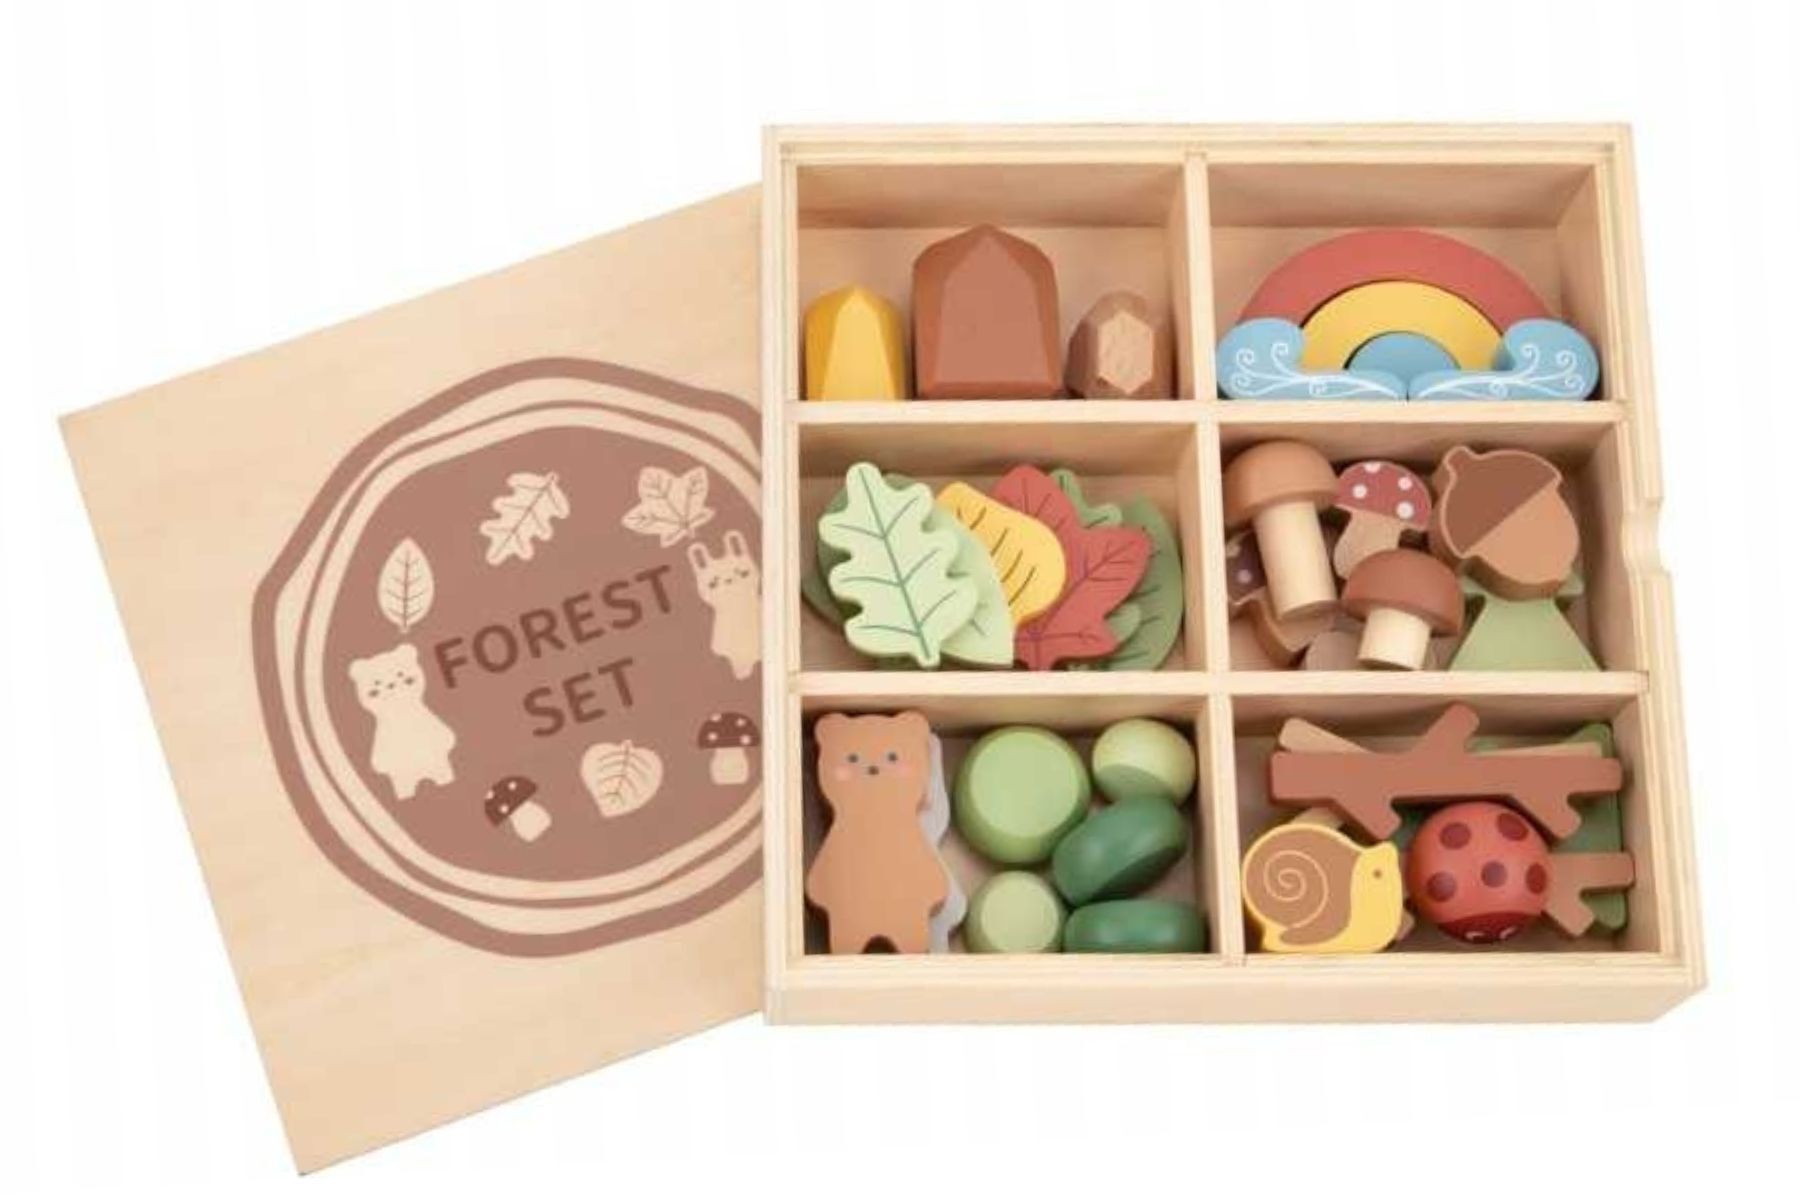 Shop Tooky toy my forest friends wooden play set for kIds